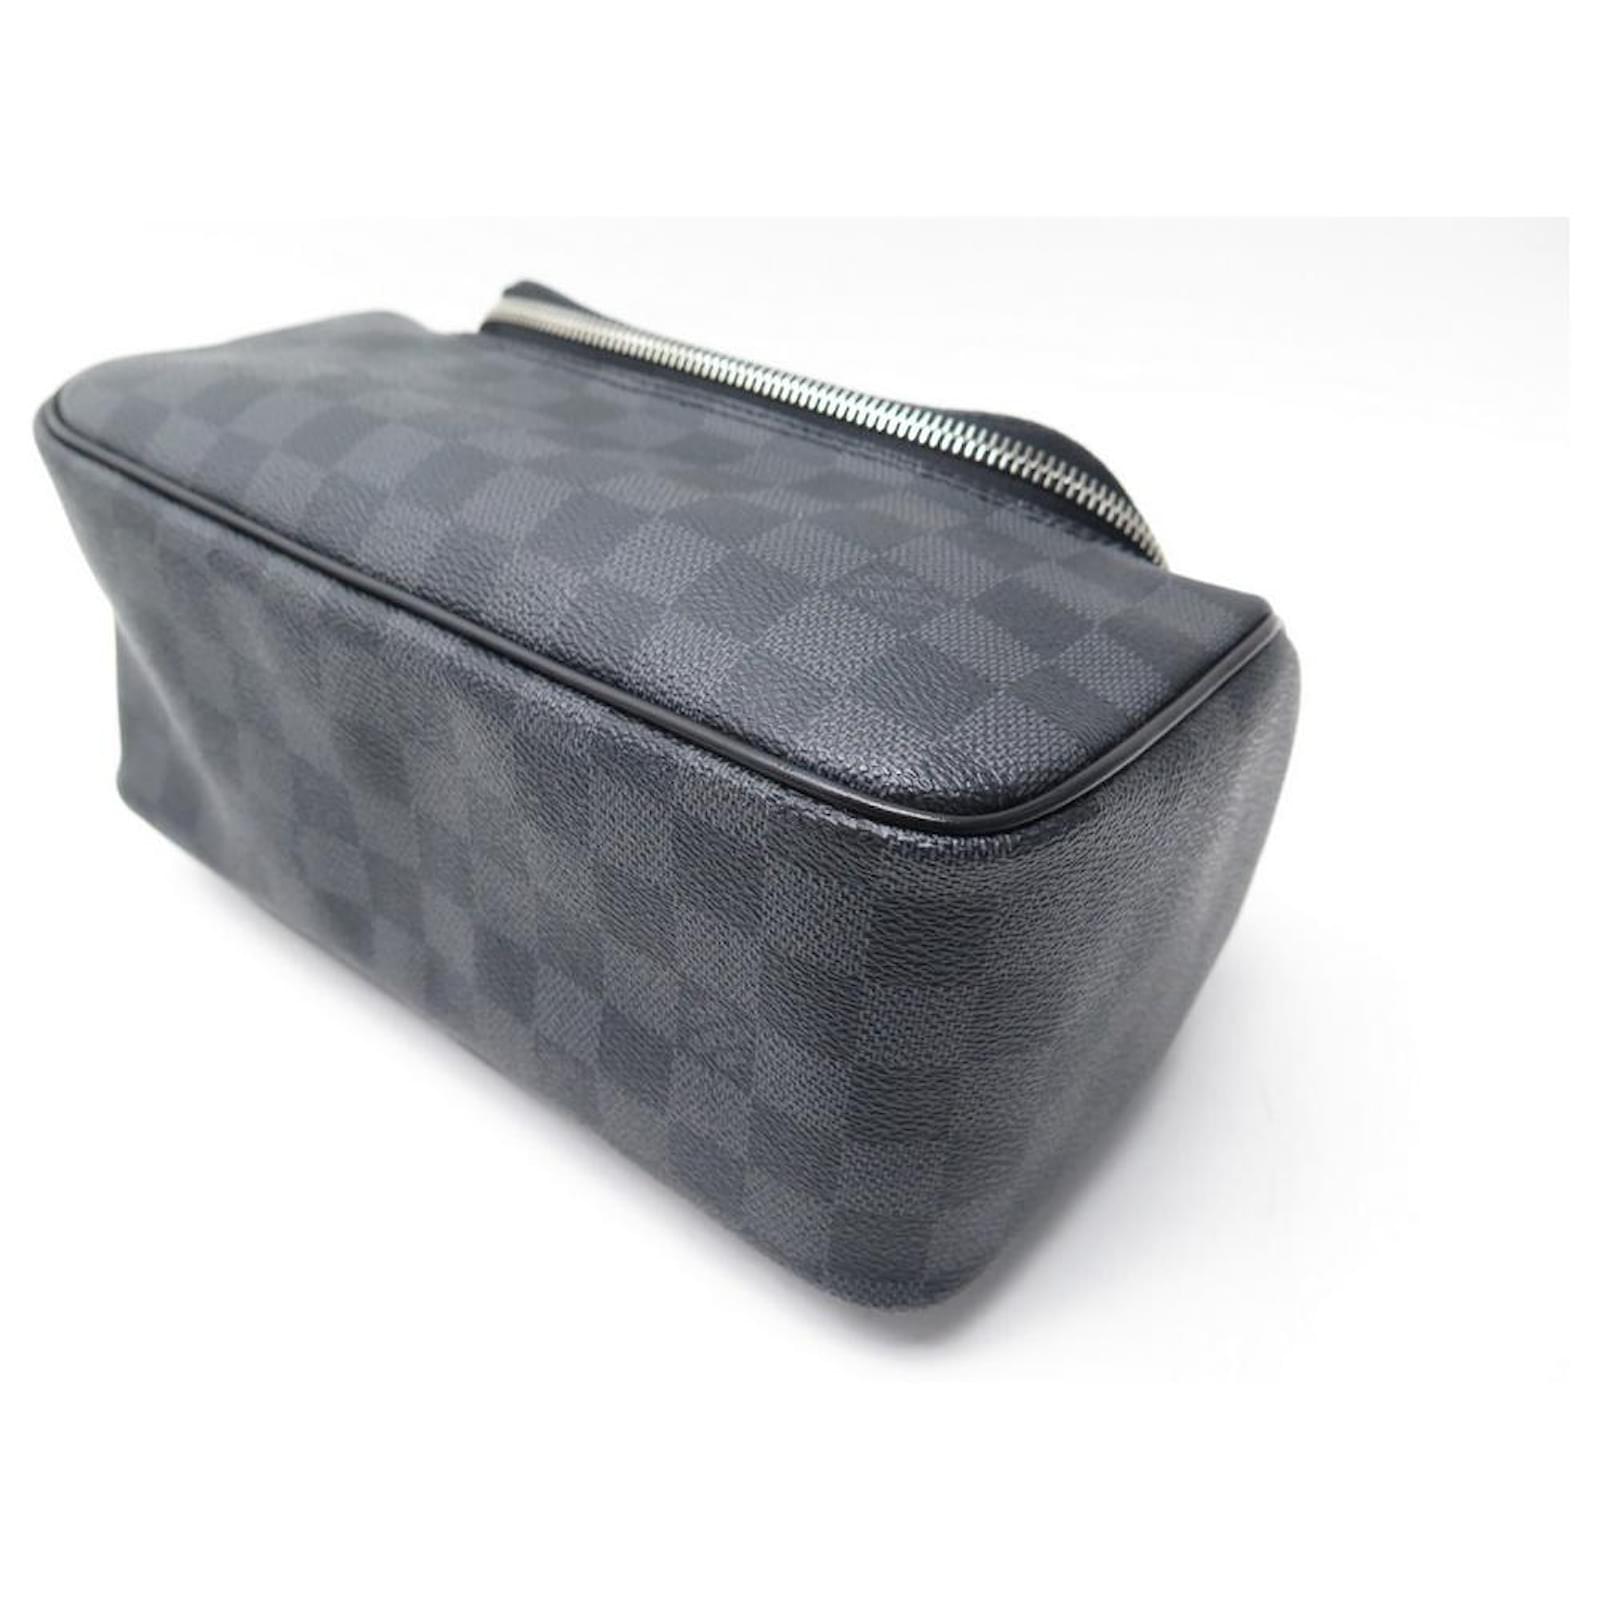 LOUIS VUITTON TOILETRY BAG IN DAMIER GRAPHITE POUCH